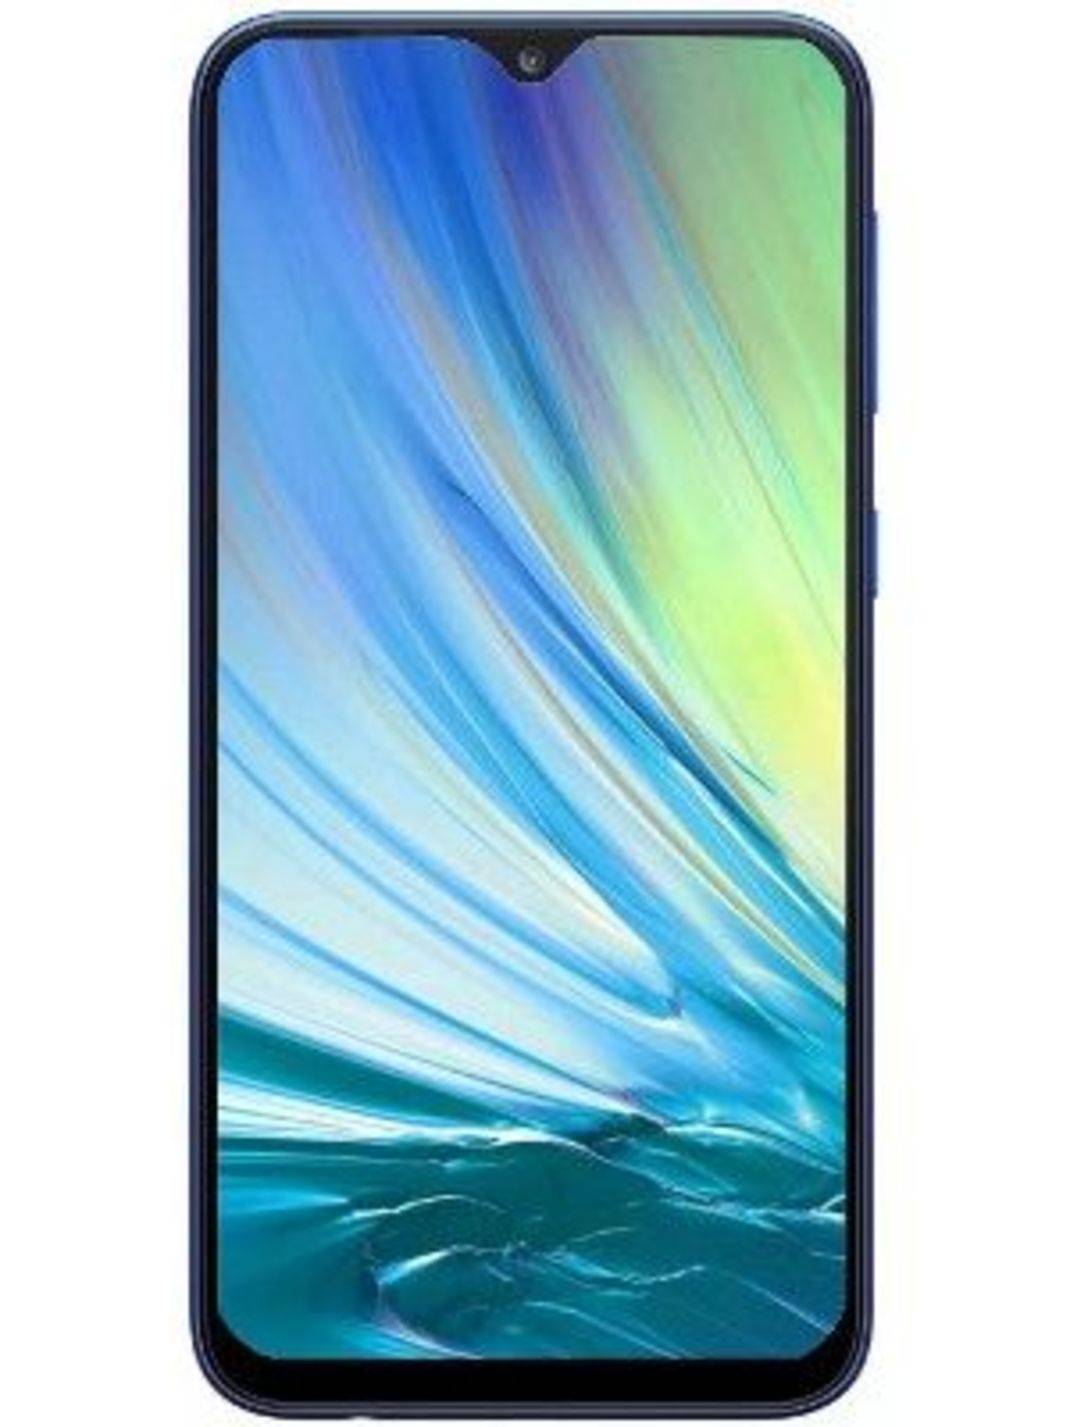 Samsung Galaxy A51 Vs Samsung Galaxy S10 Lite Compare Specifications Price Gadgets Now